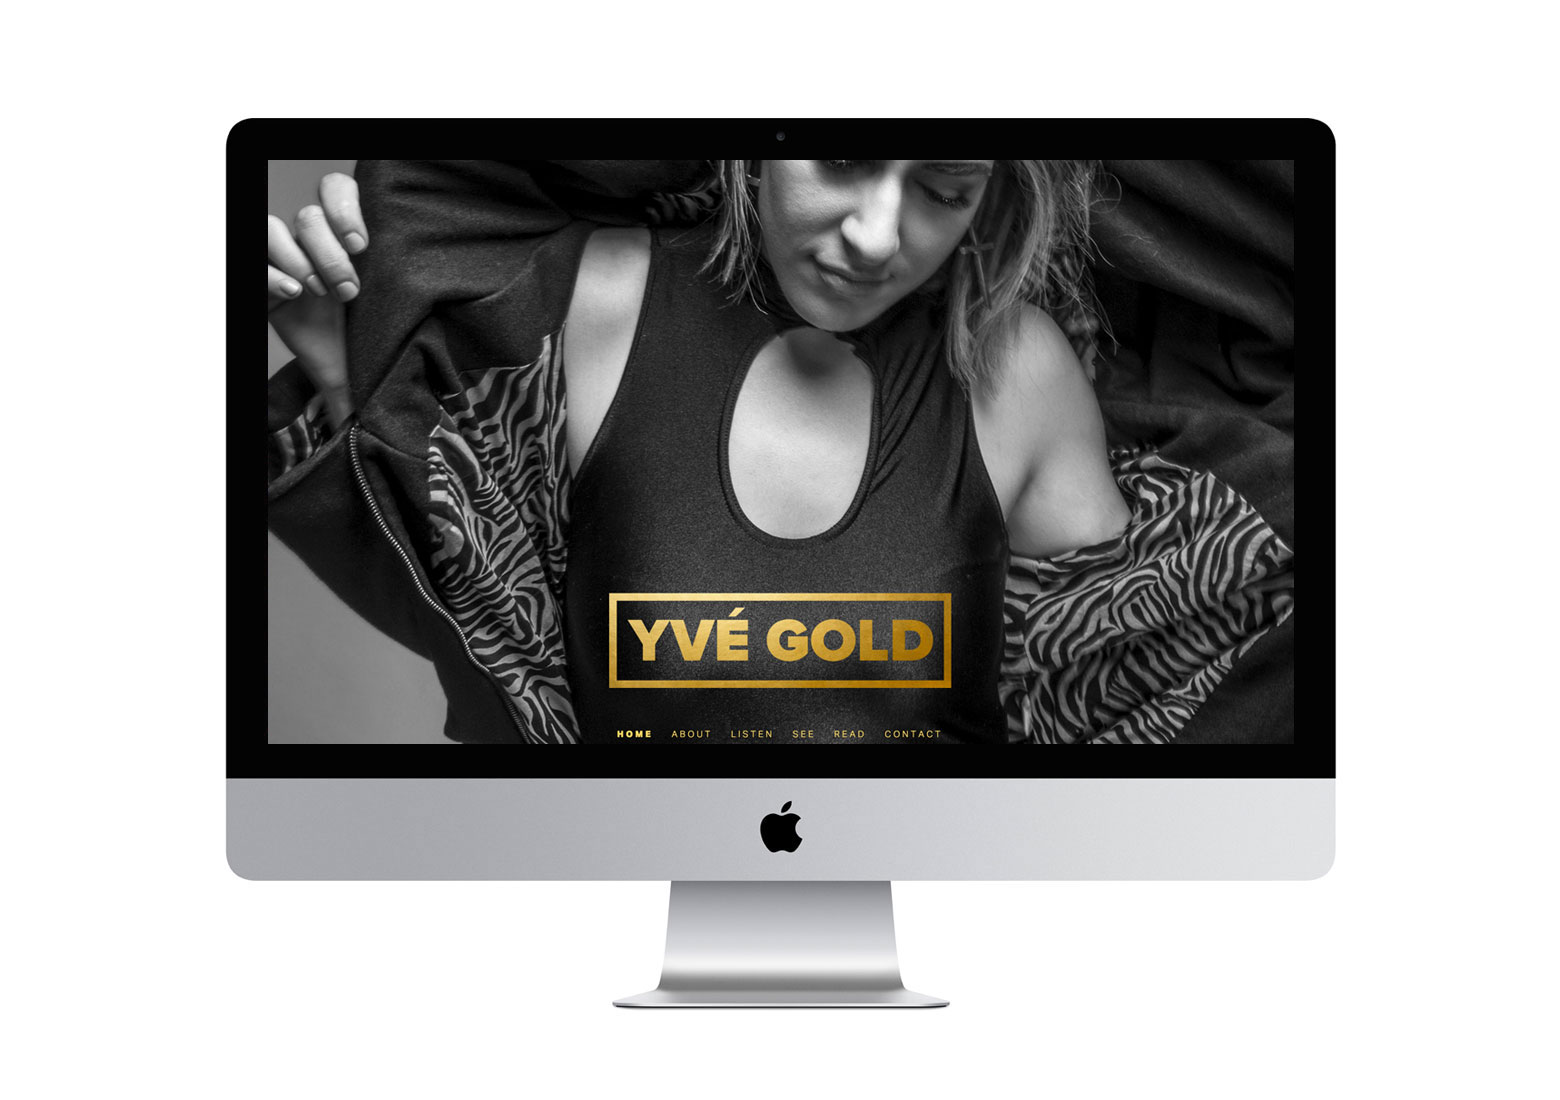 Yve Gold website and branding by Rising Creative